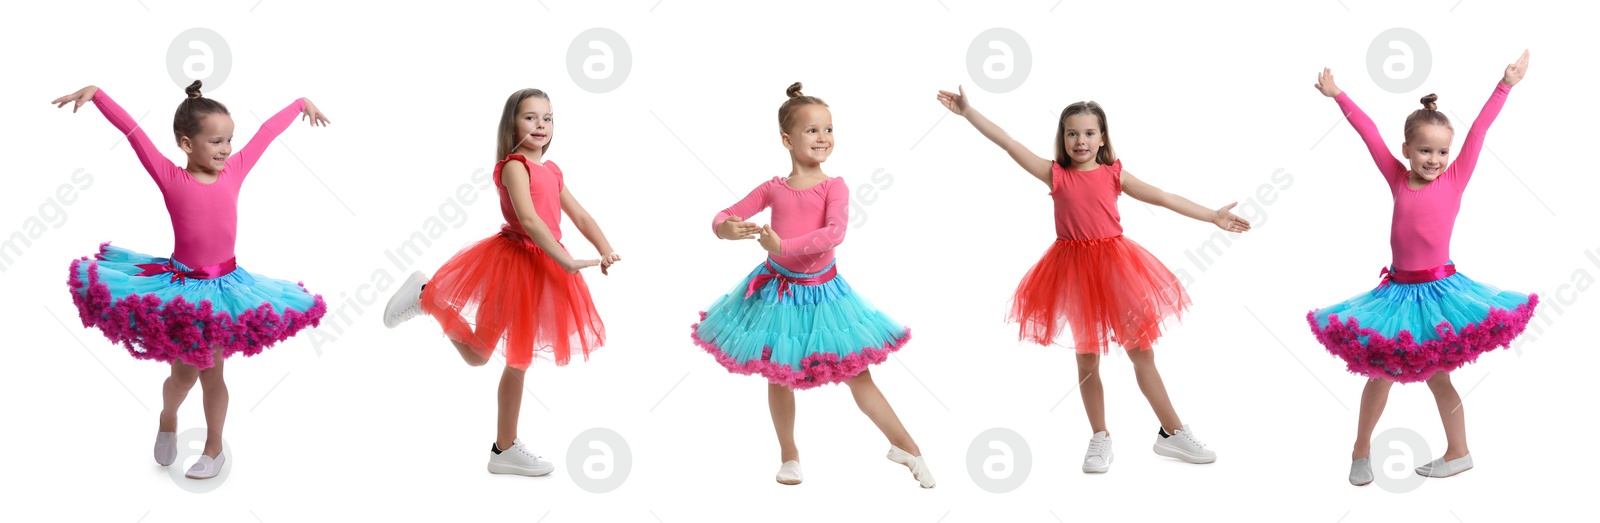 Image of Cute little girls dancing on white background, set of photos